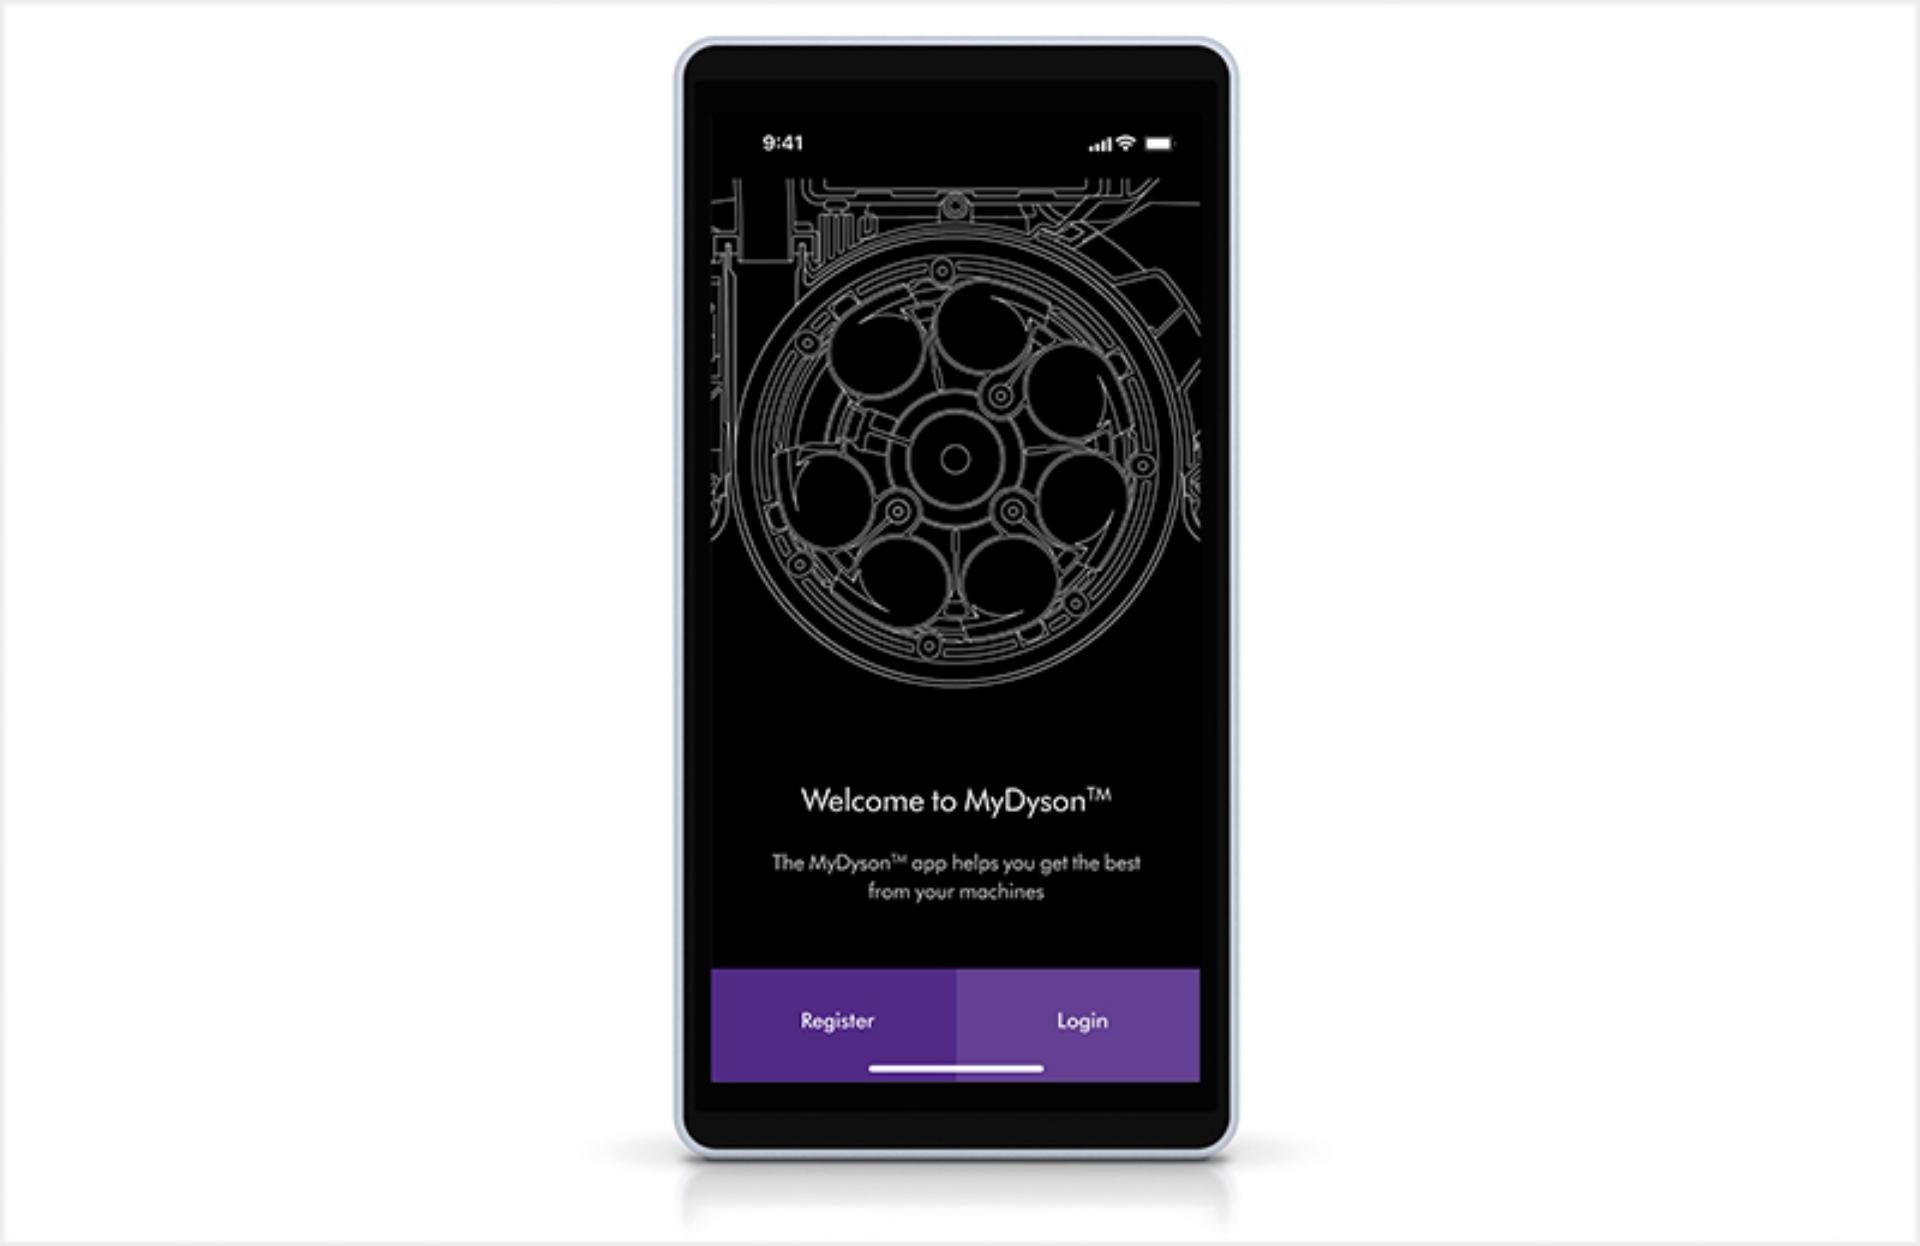 The MyDyson app displayed on a smartphone.